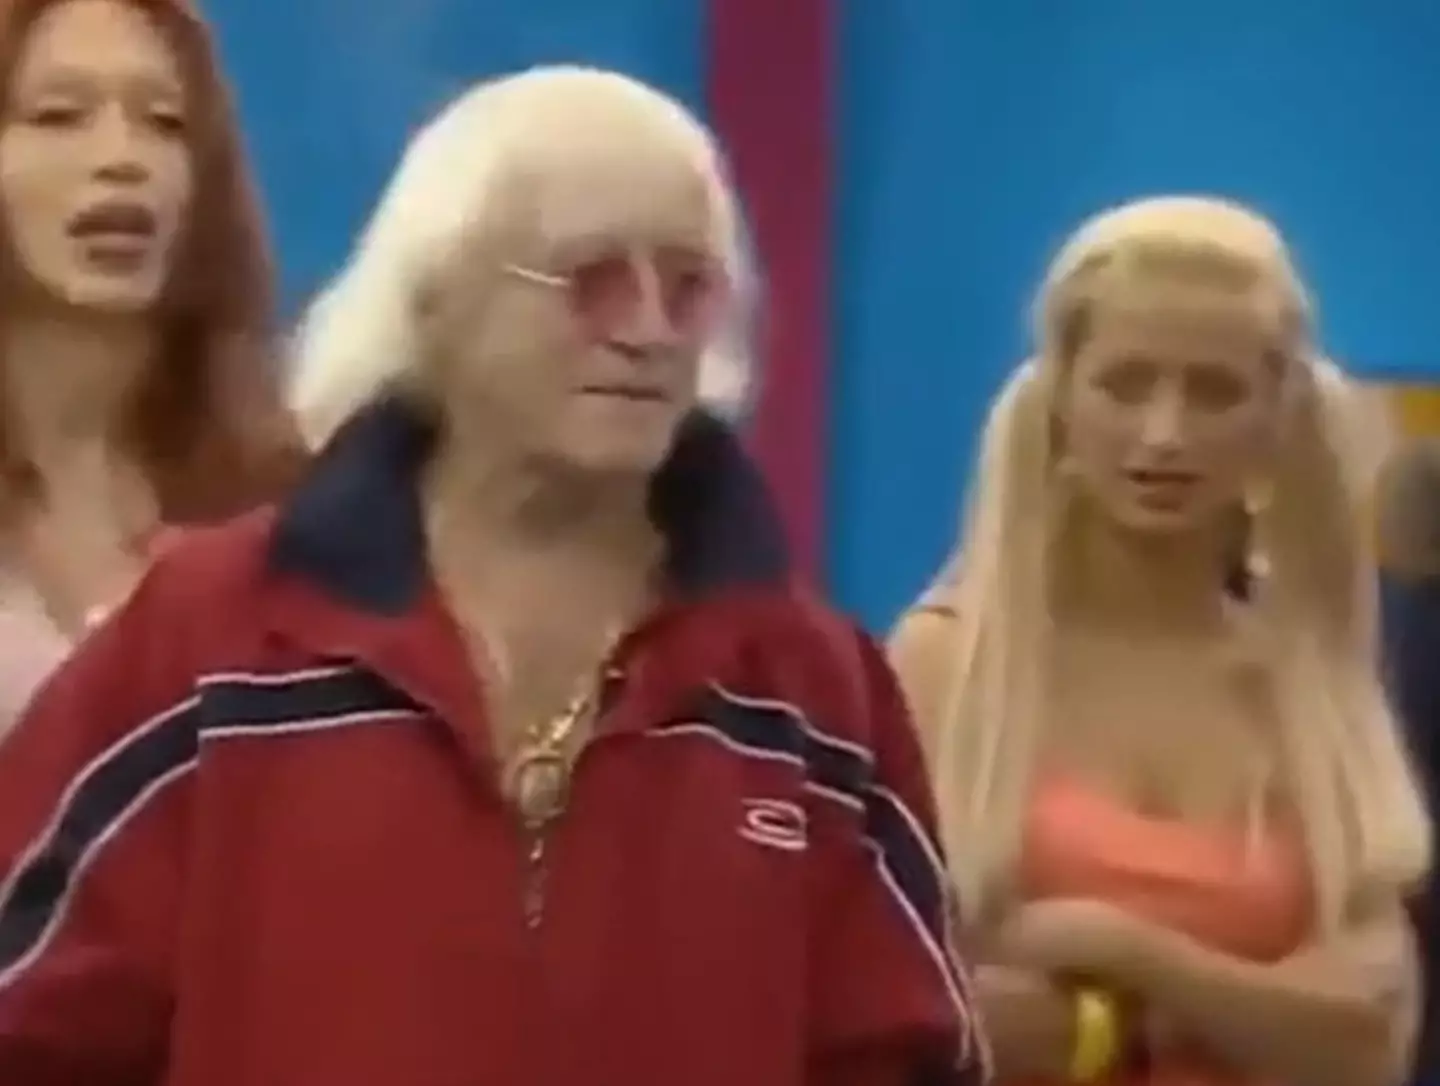 Savile made a series of disturbing comments to the housemates which have seemed even more sinister since the truth about him came out.